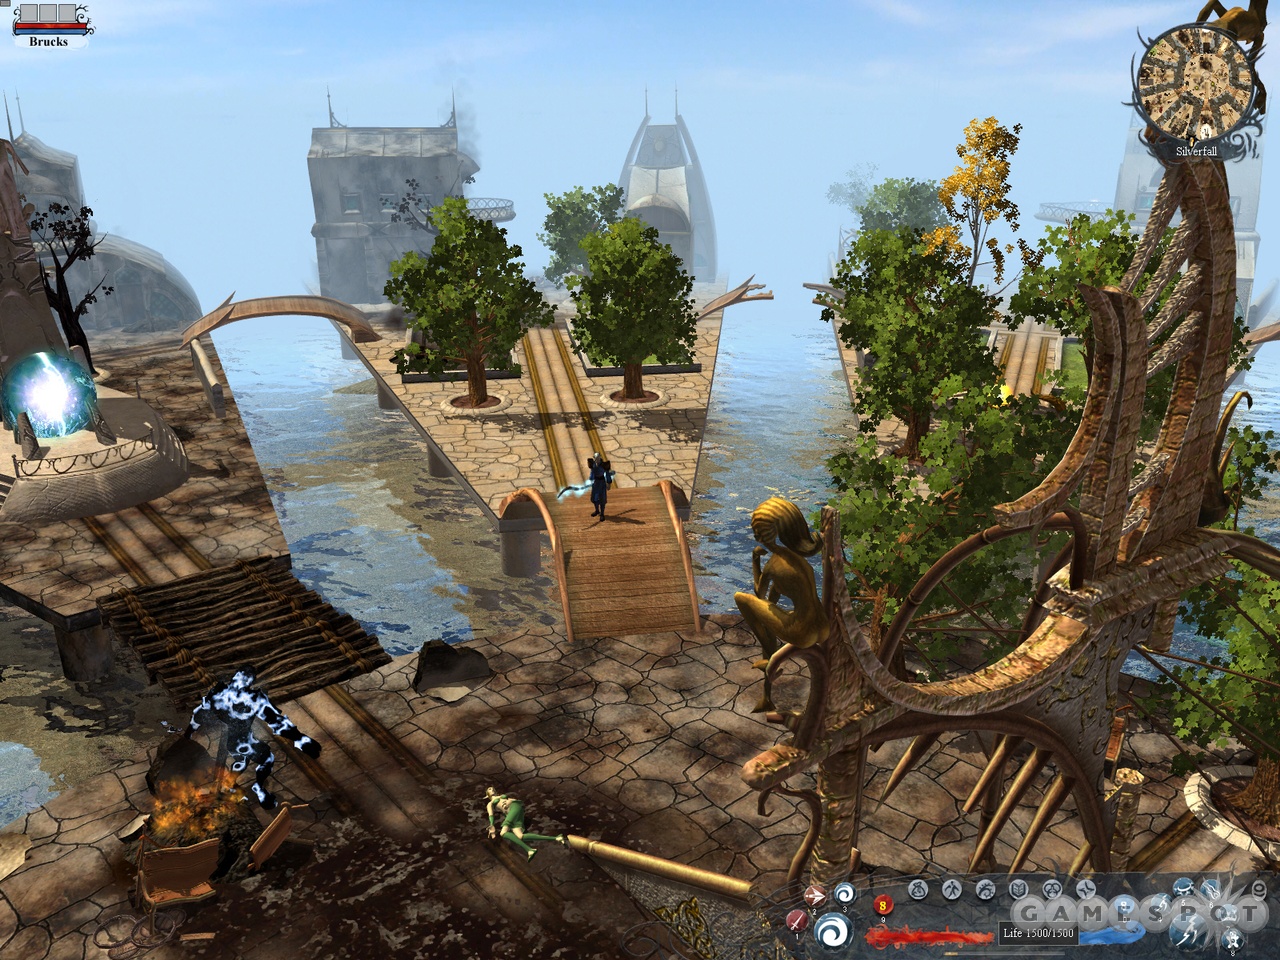 The game will also offer beautiful graphics and plenty of places to explore.